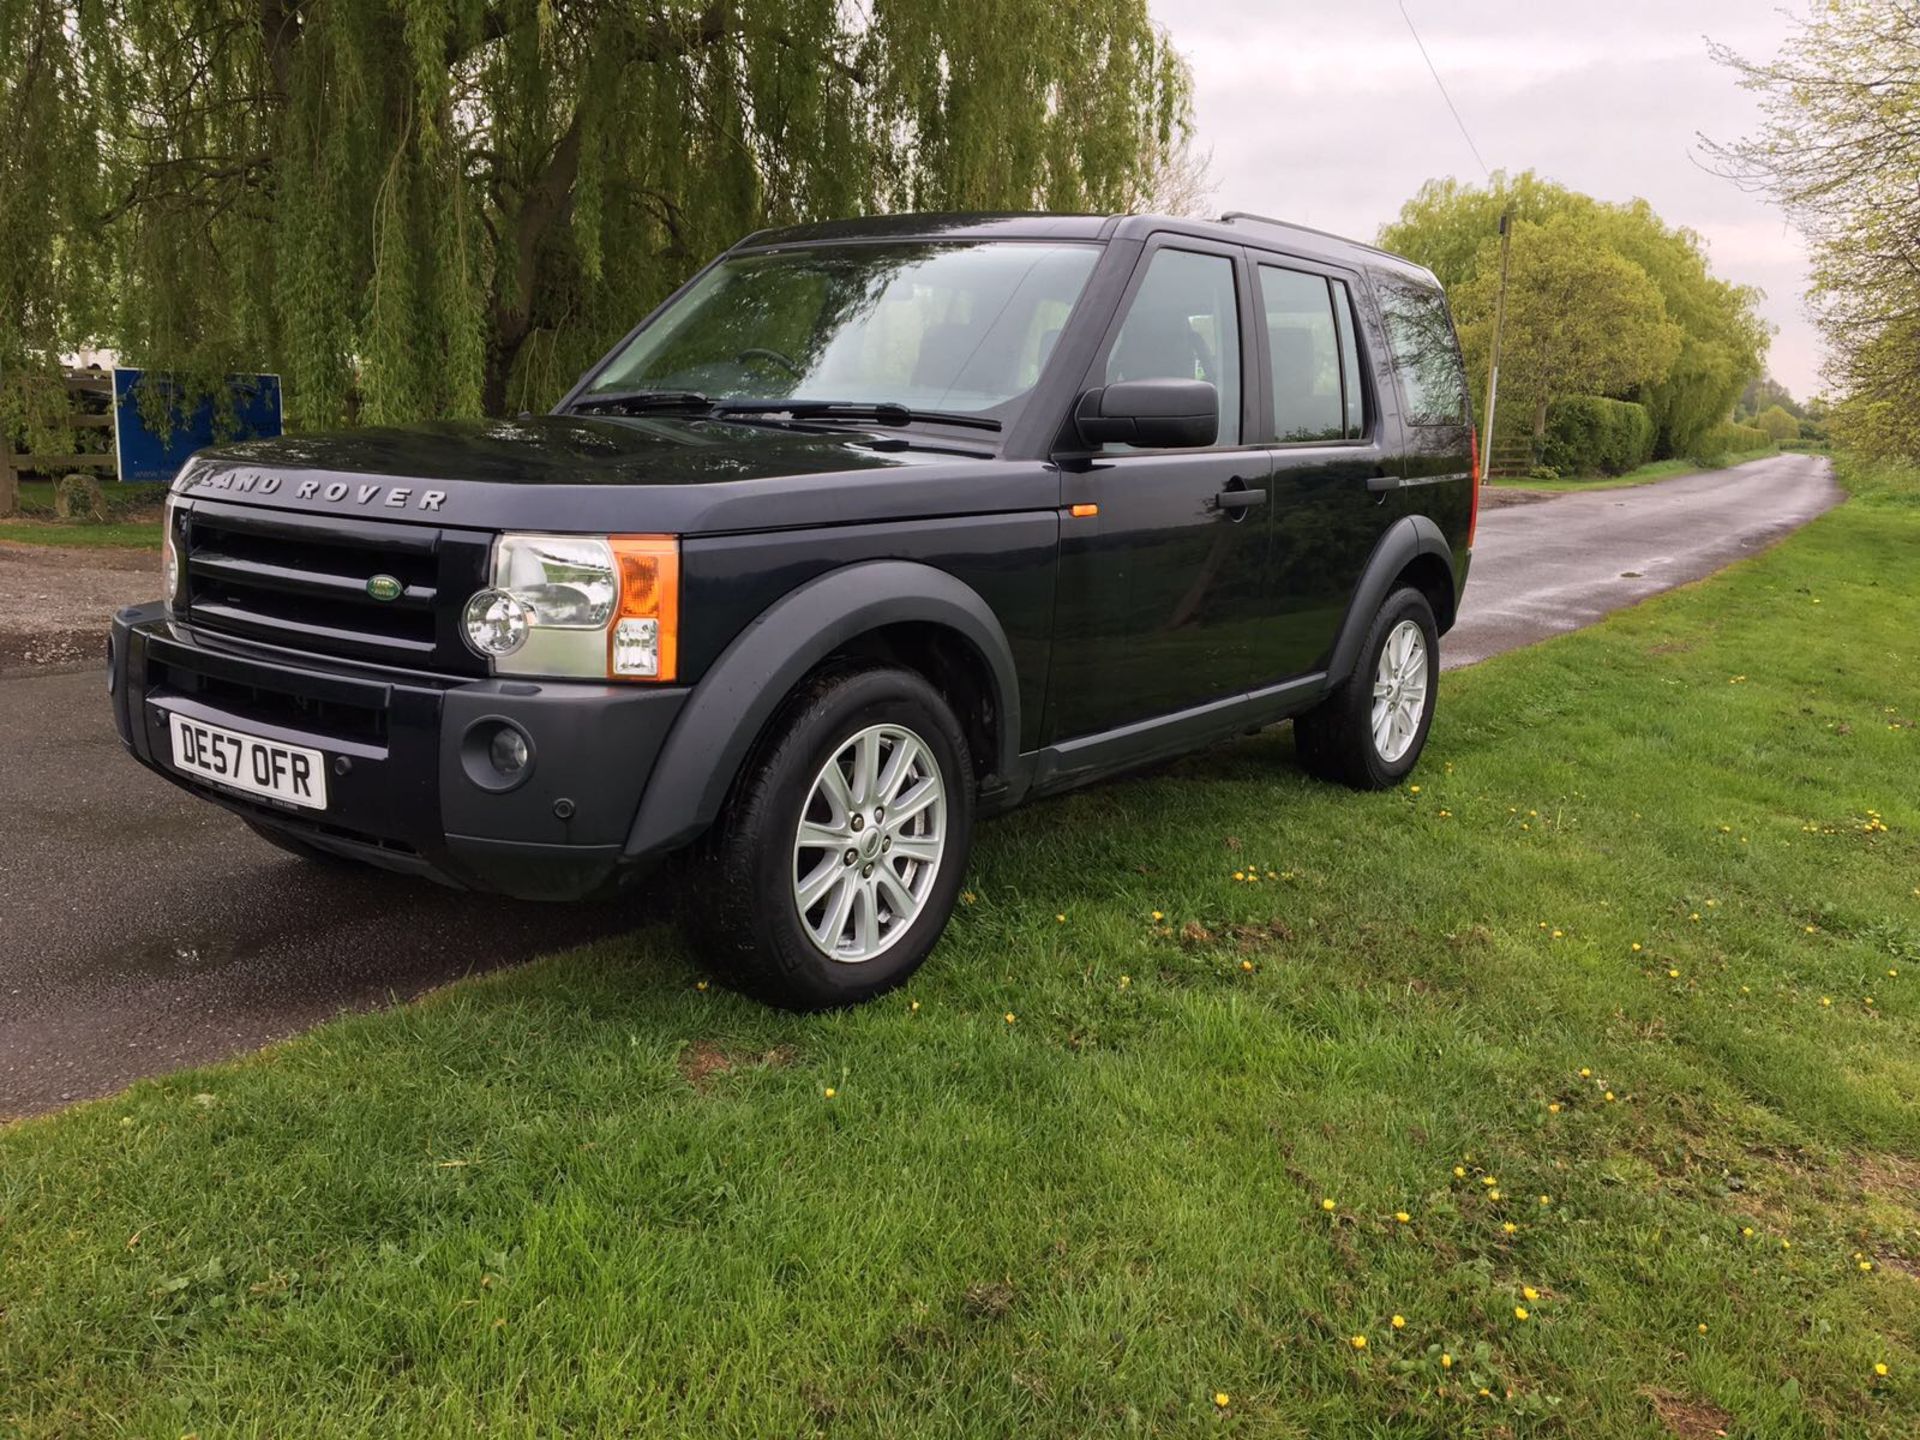 KB - 2007/57 REG LAND ROVER DISCOVERY 3 TDV6 SE AUTOMATIC, SAT NAV, AIR CON, HEATED SEATS ETC   DATE - Image 3 of 16